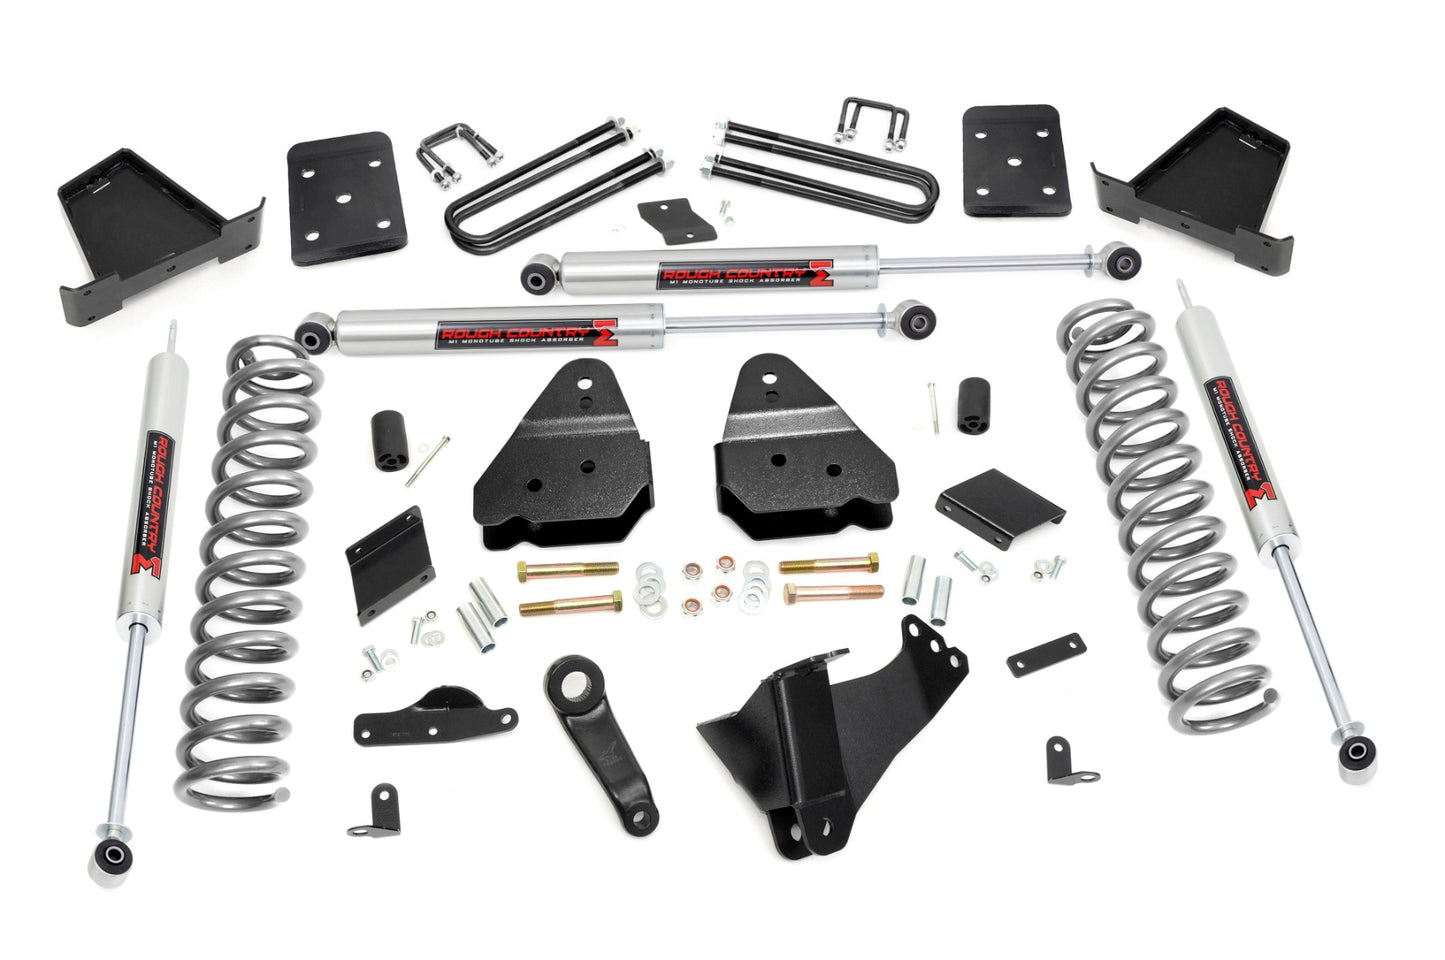 Rough Country (56740) 4.5 Inch Lift Kit | OVLD | M1 | Ford F-250 Super Duty 4WD (15-16)